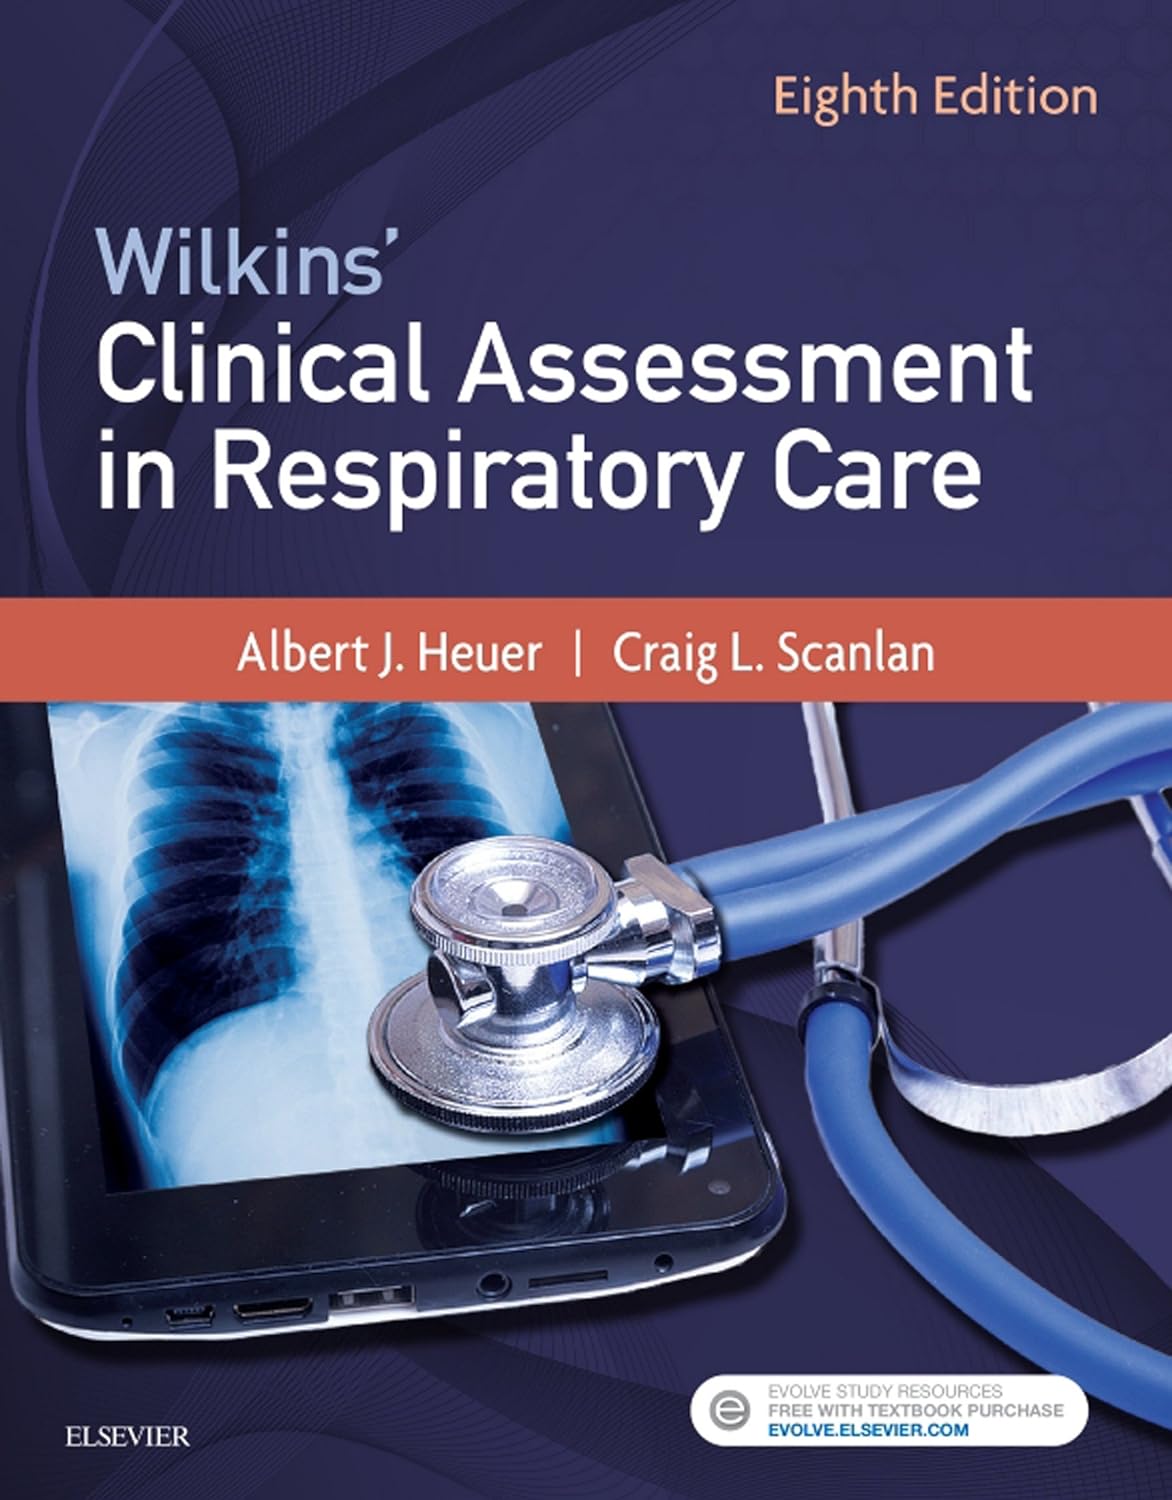 Wilkins  Clinical Assessment in Respiratory Care, 8th Edition by Albert J. Heuer